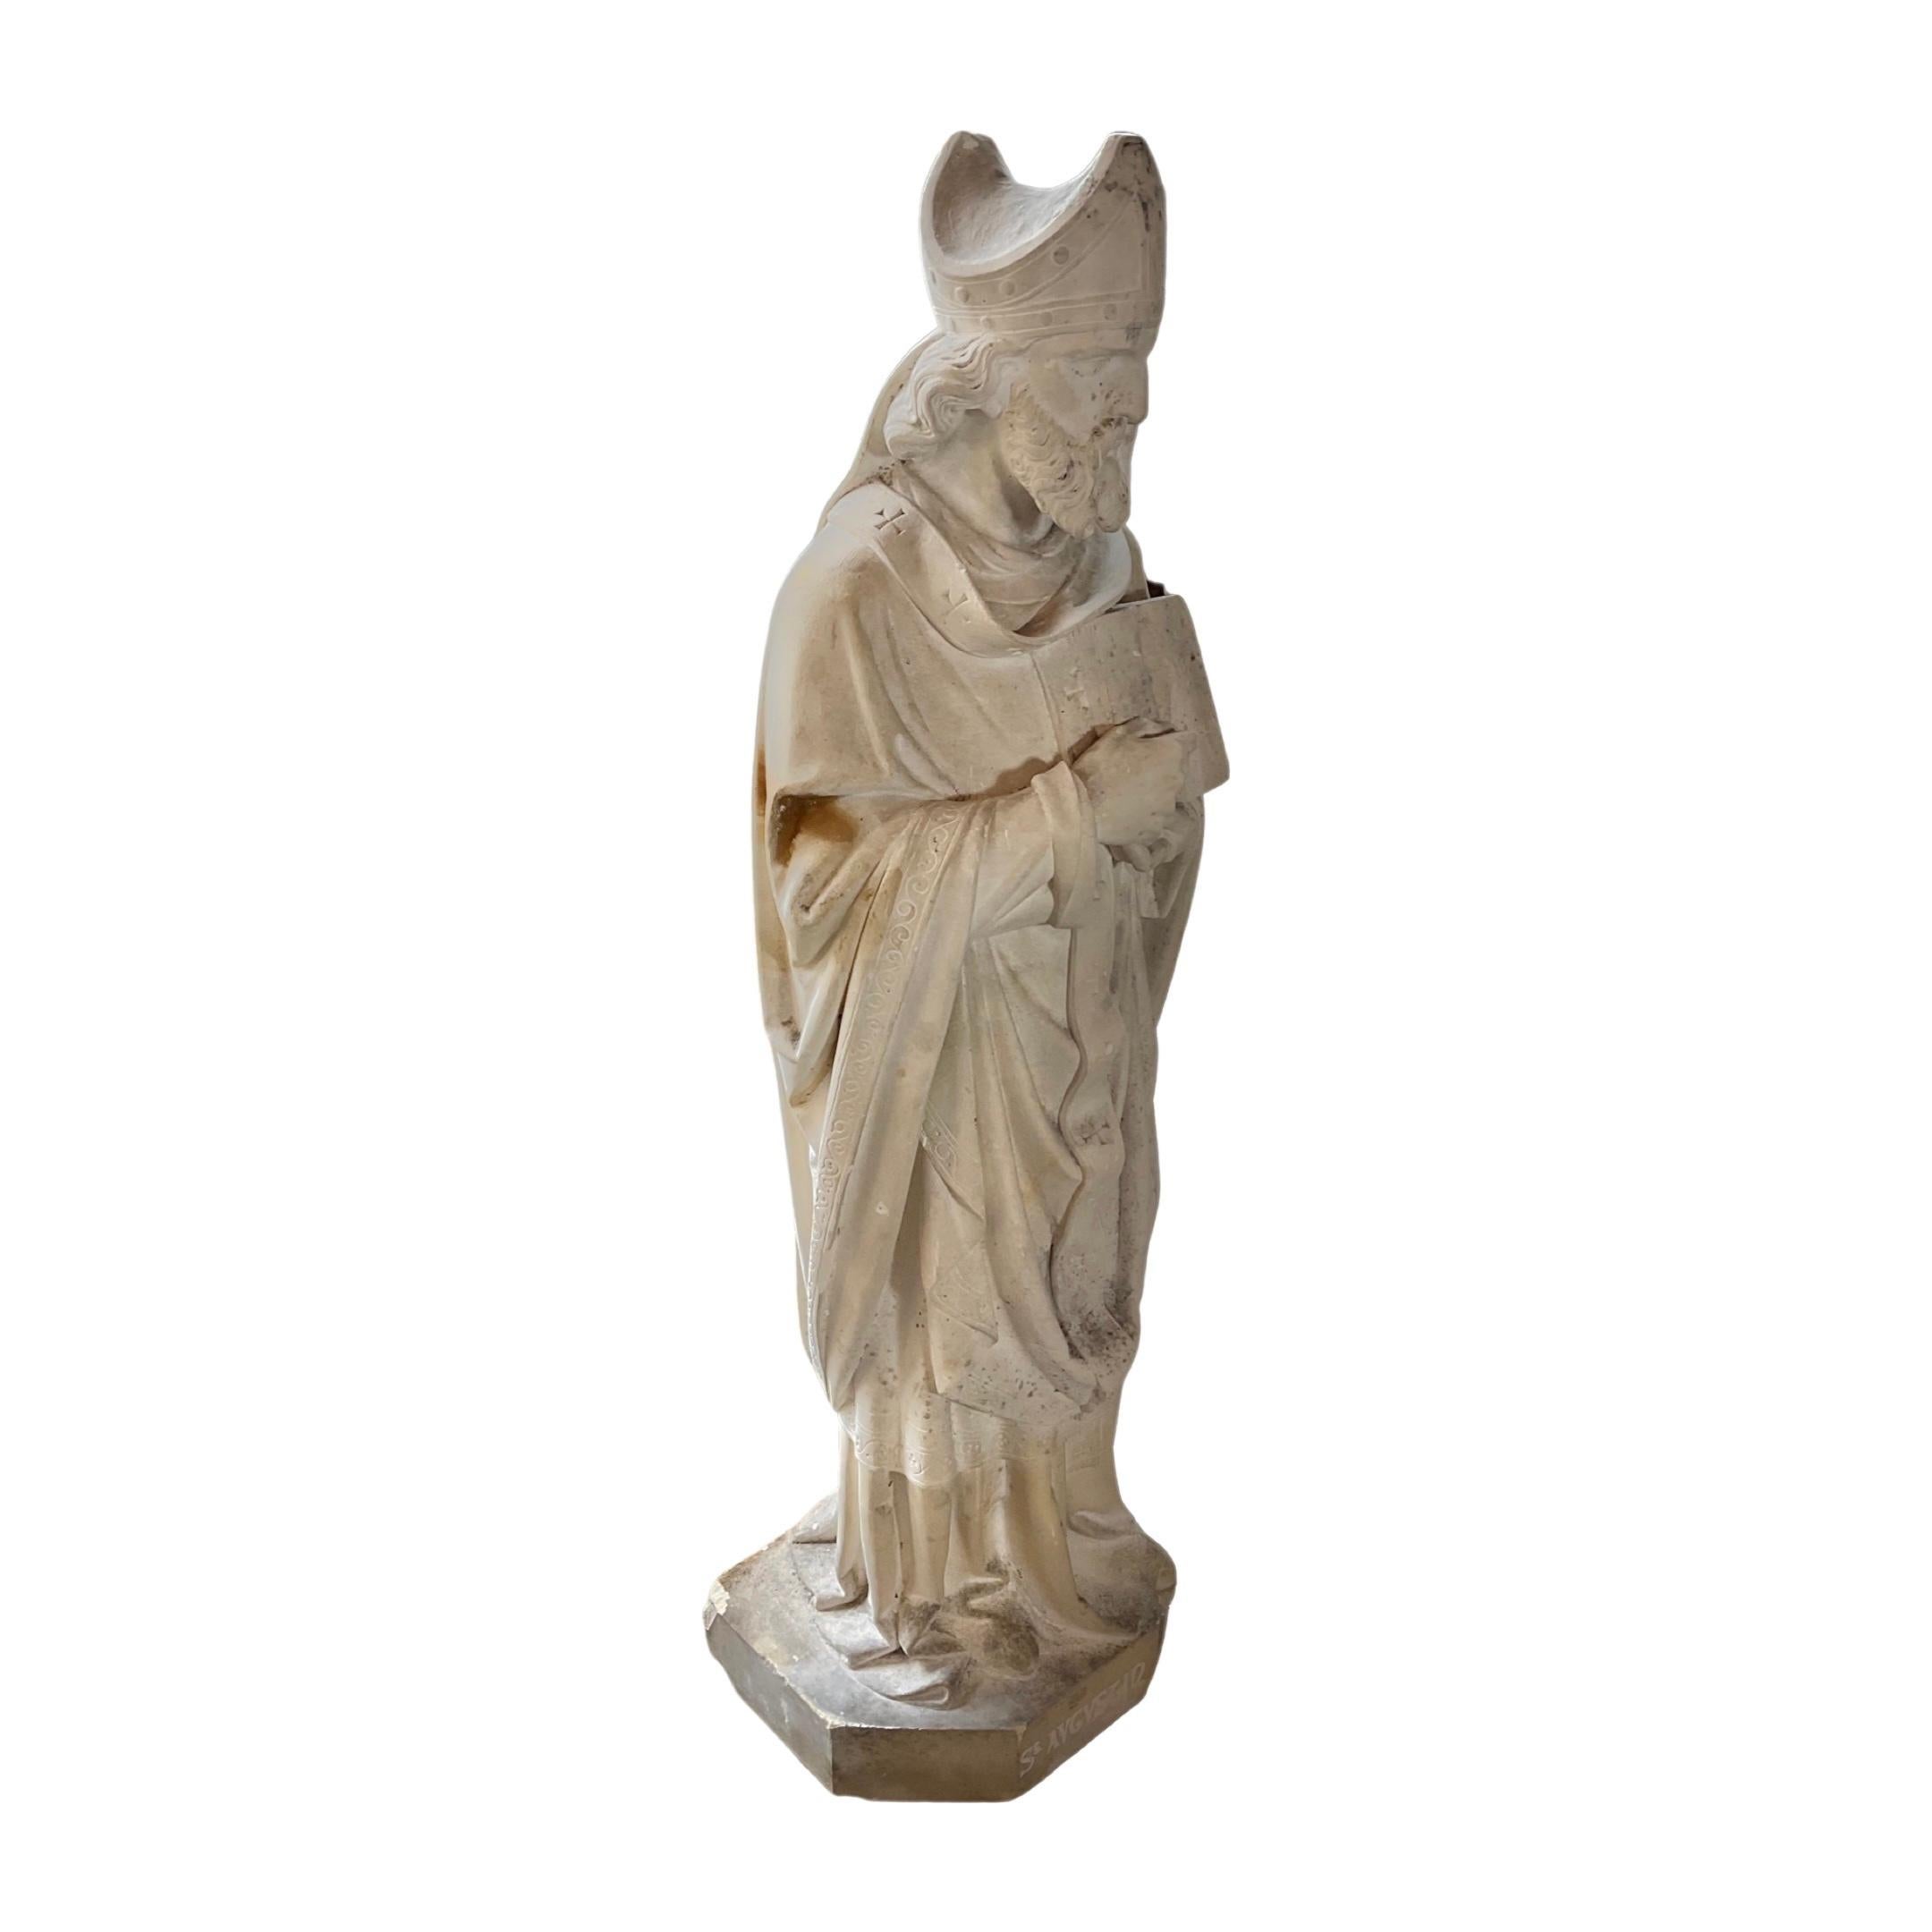 This 17th century French Limestone Saint Sculpture is evidence of extraordinary artistic proficiency, expertly crafted from French Limestone in order to maintain its artistic integrity.